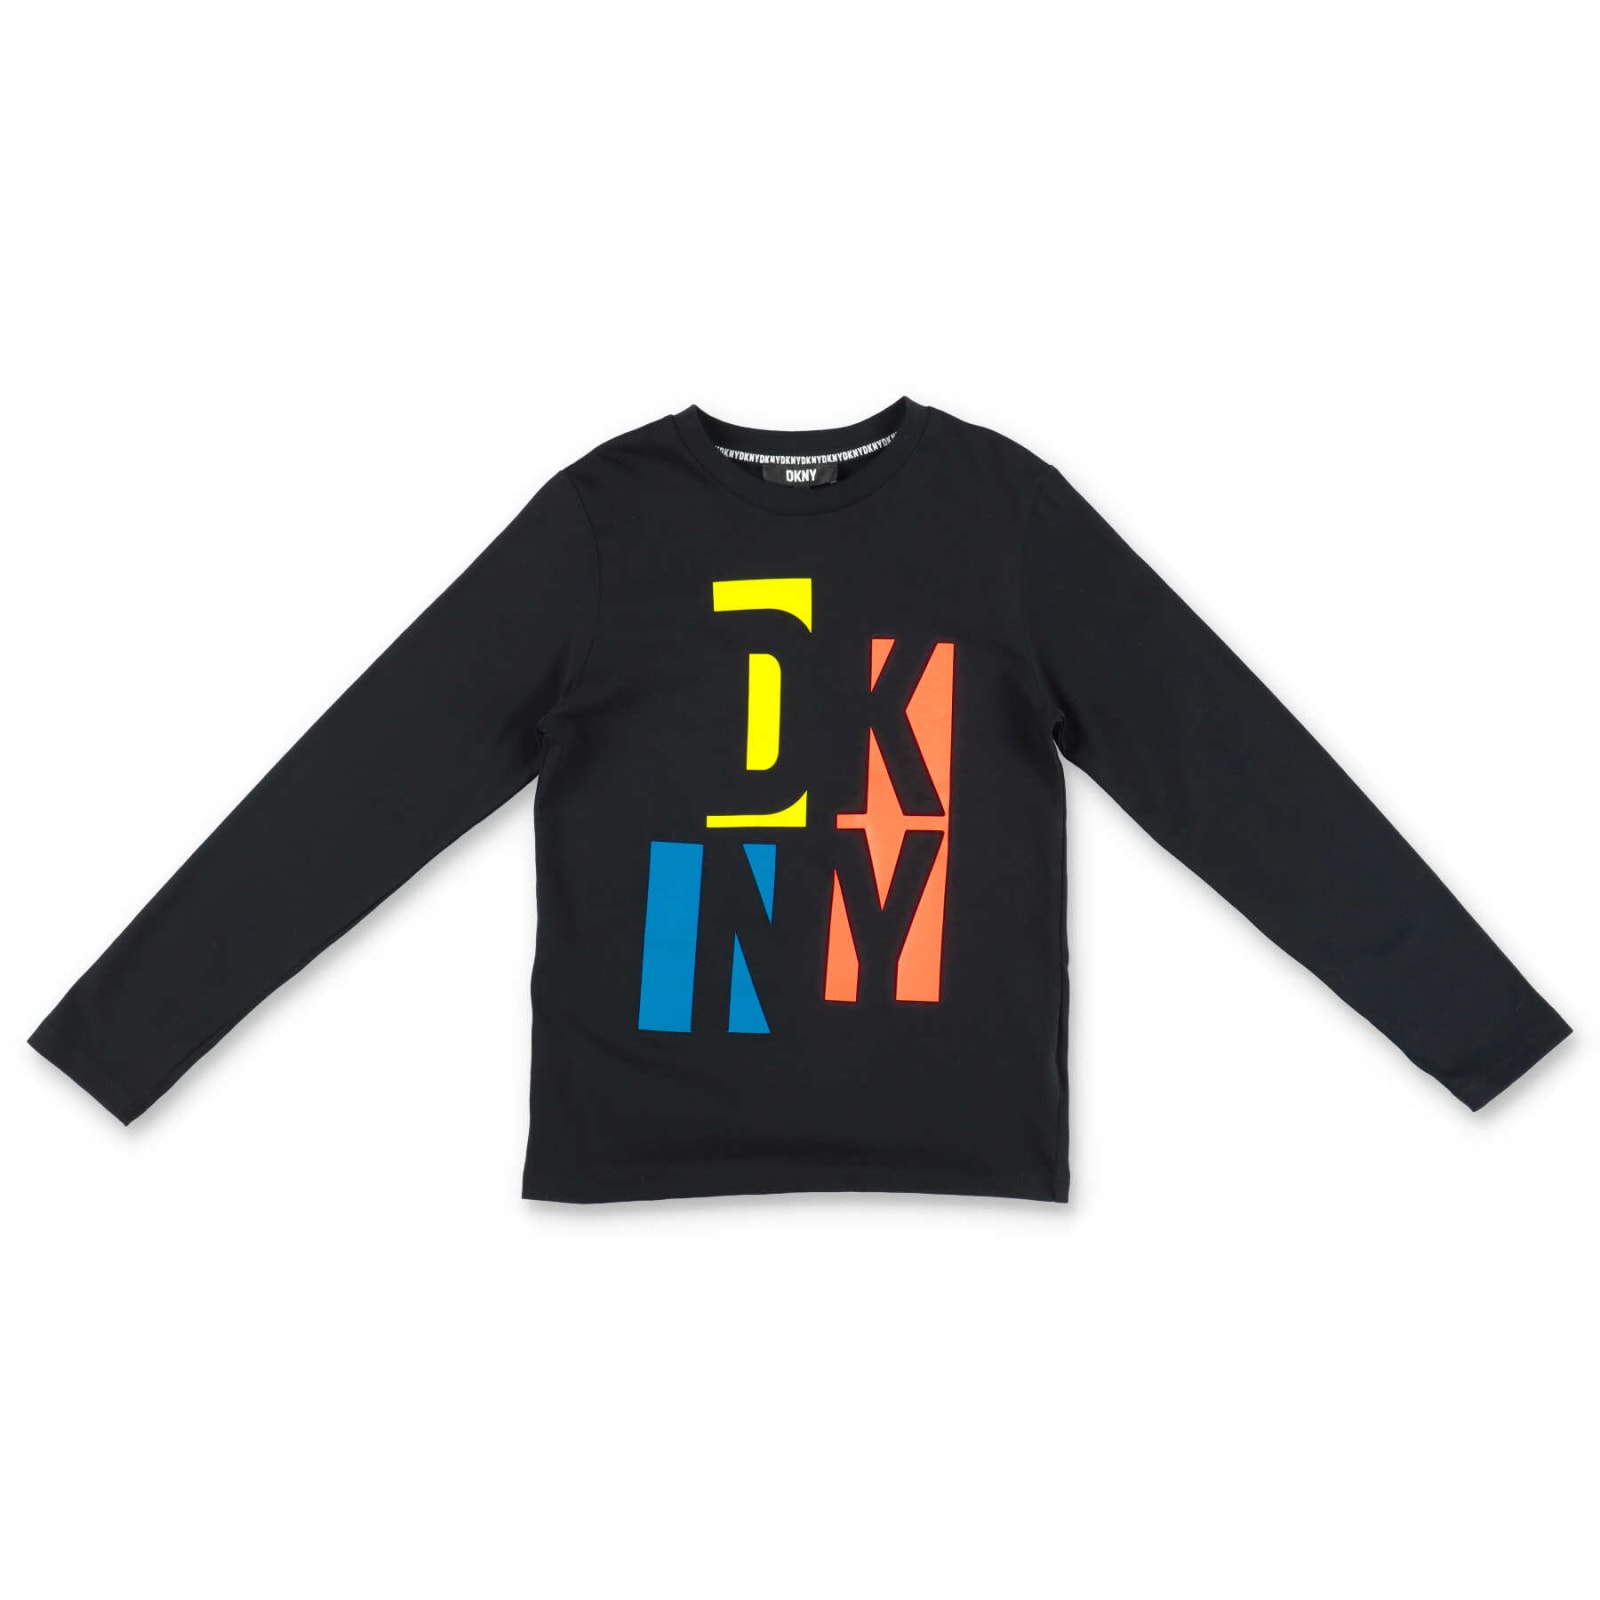 Dkny T-shirt Nera In Jersey Di Cotone